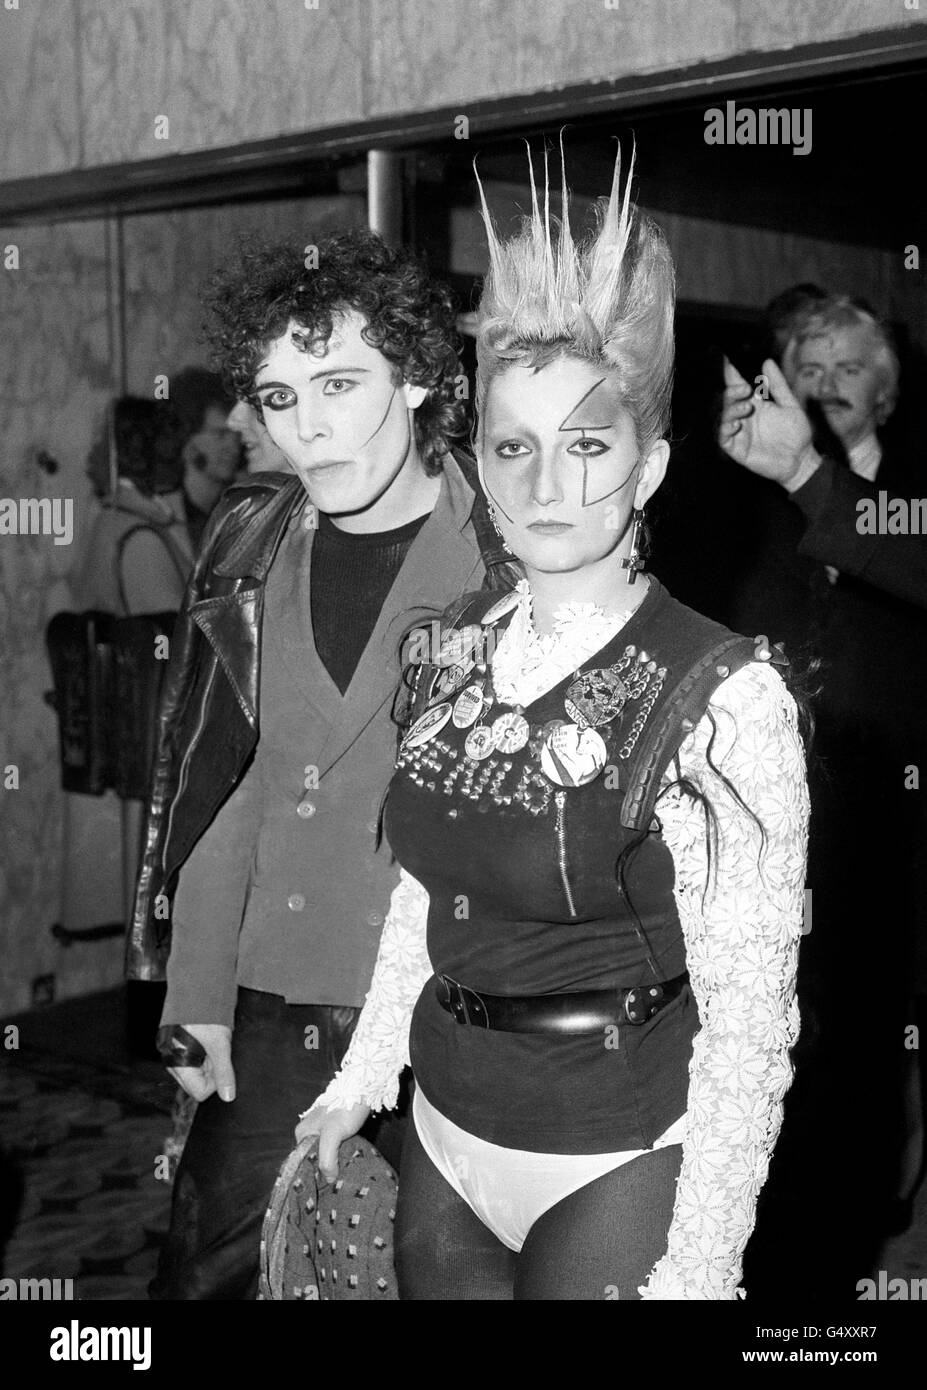 Punk Rockers Adam Ant and Jordan attending the movie premiere of the John Travolta film, 'Saturday Night Fever' at the Empire, Leicester Square in London. Stock Photo